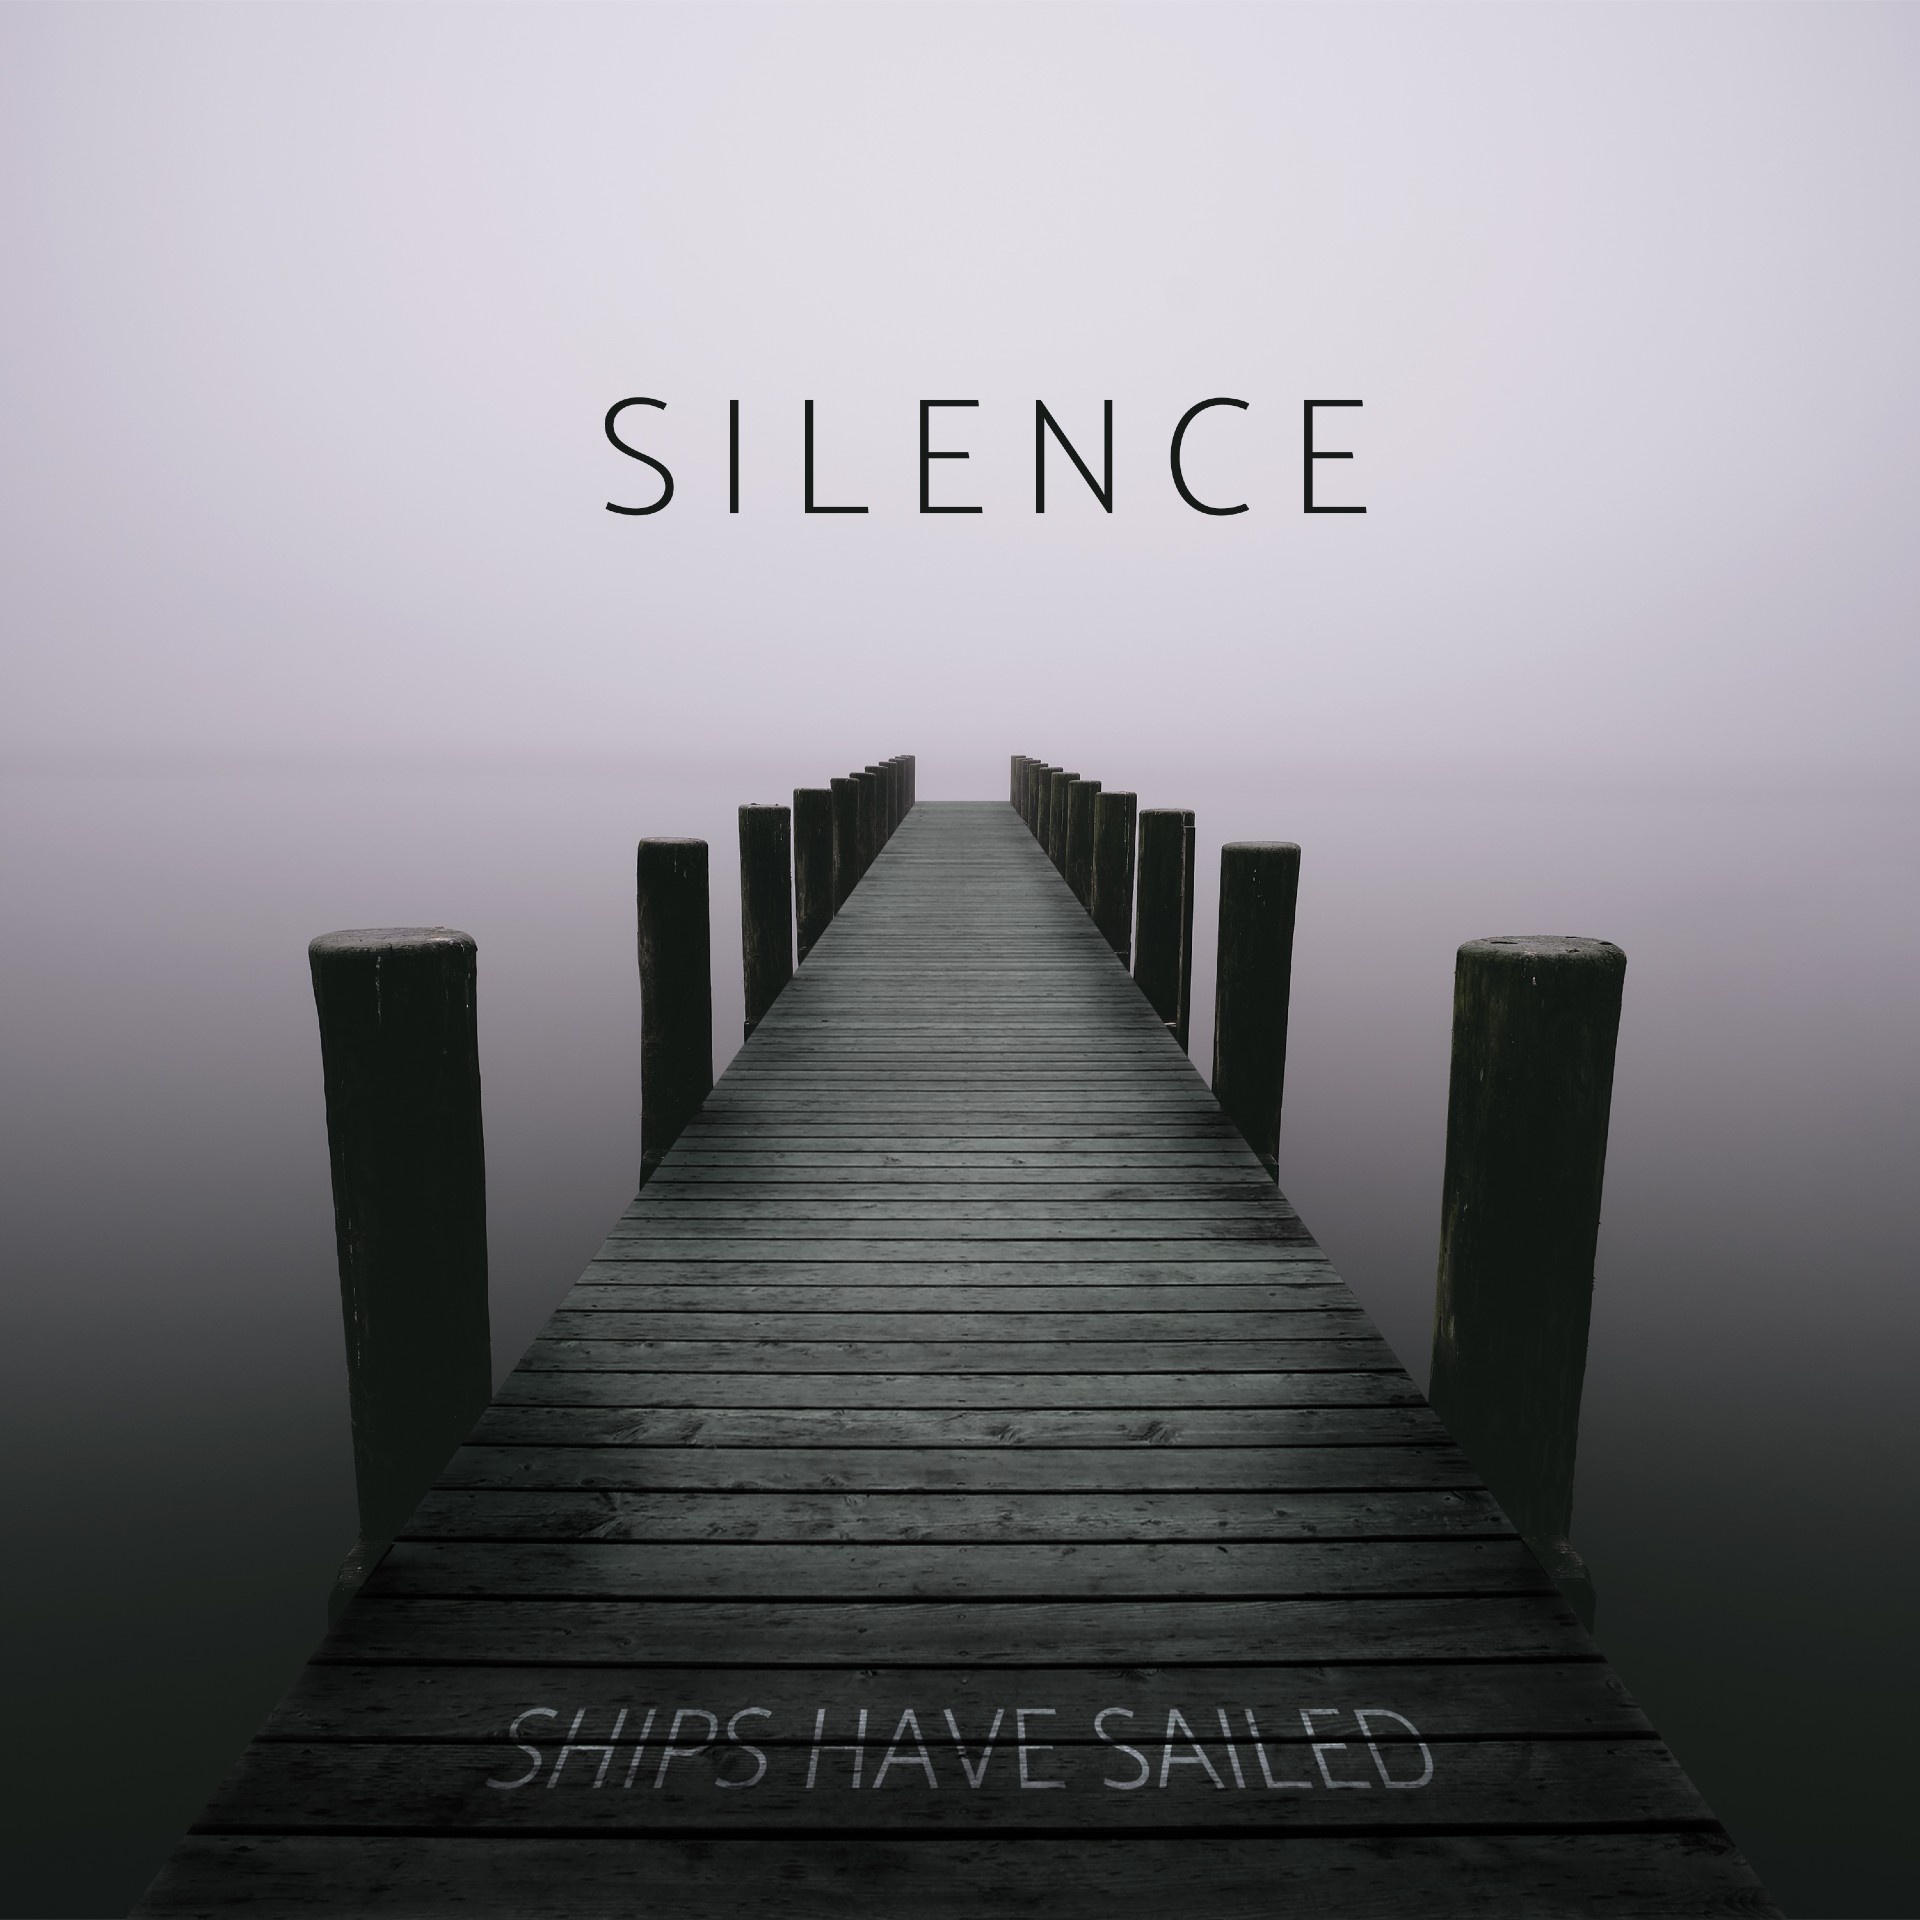 Ships Have Sailed - “Silence” [Song Review] - V13.net